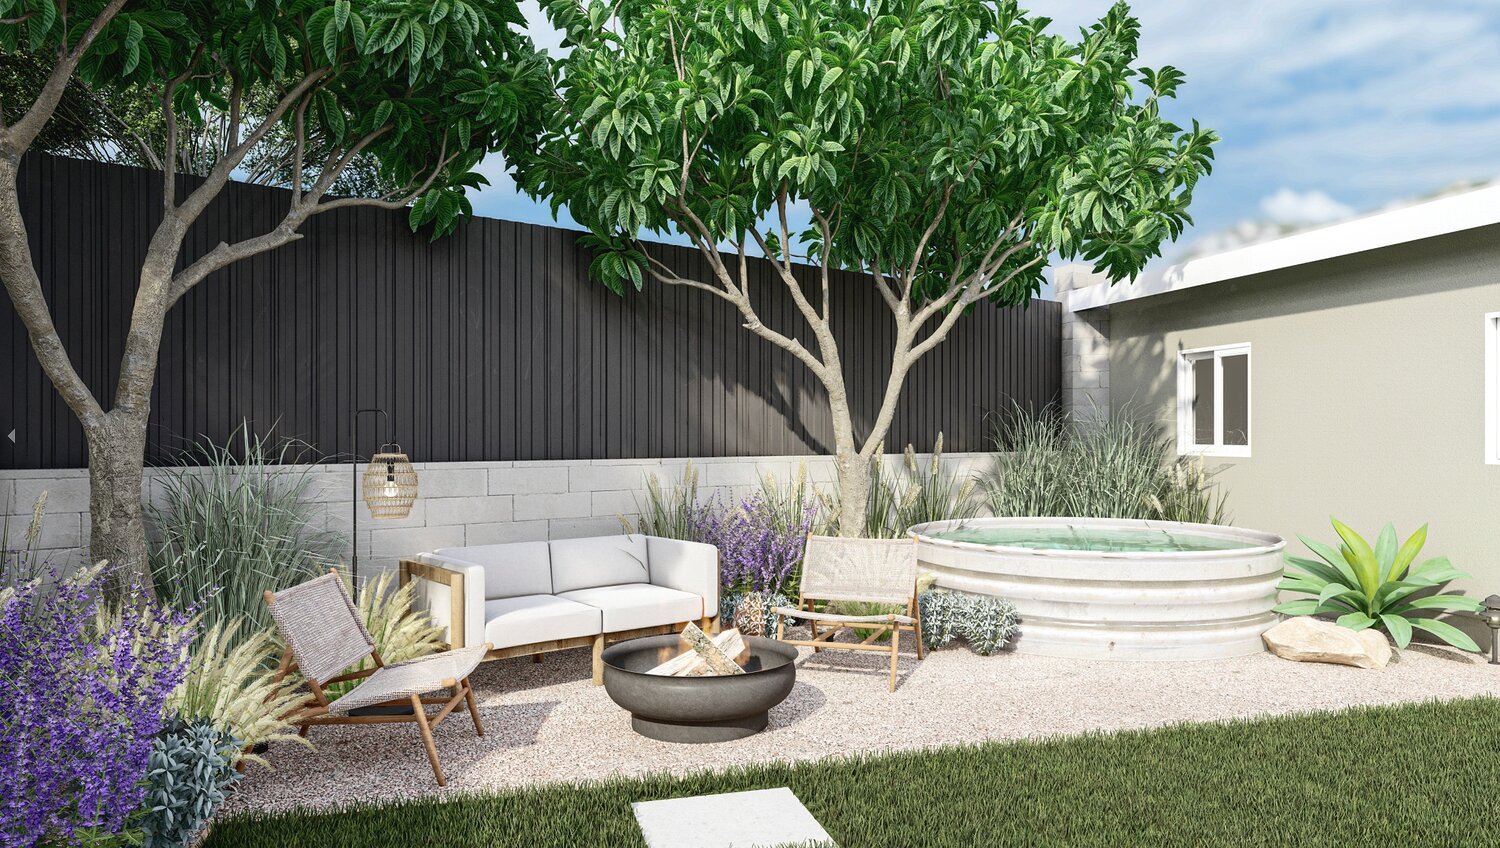 Above-ground stock tank pool surrounded by drought-tolerant plants and seating area with loveseat, lounge chairs, and fire pit